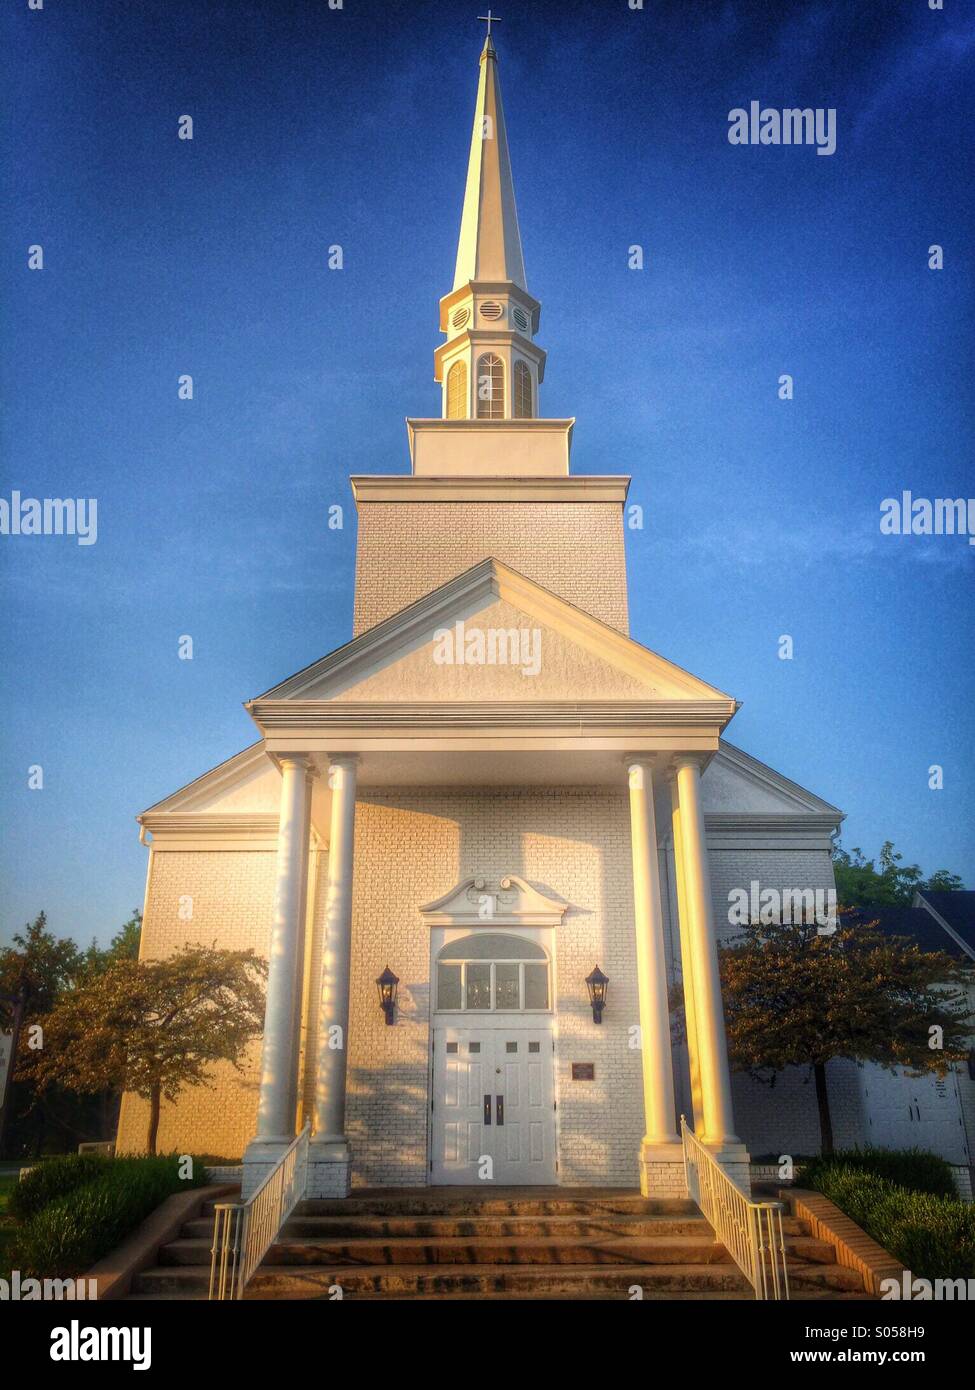 A traditional church and steeple against a deep blue sky Stock Photo